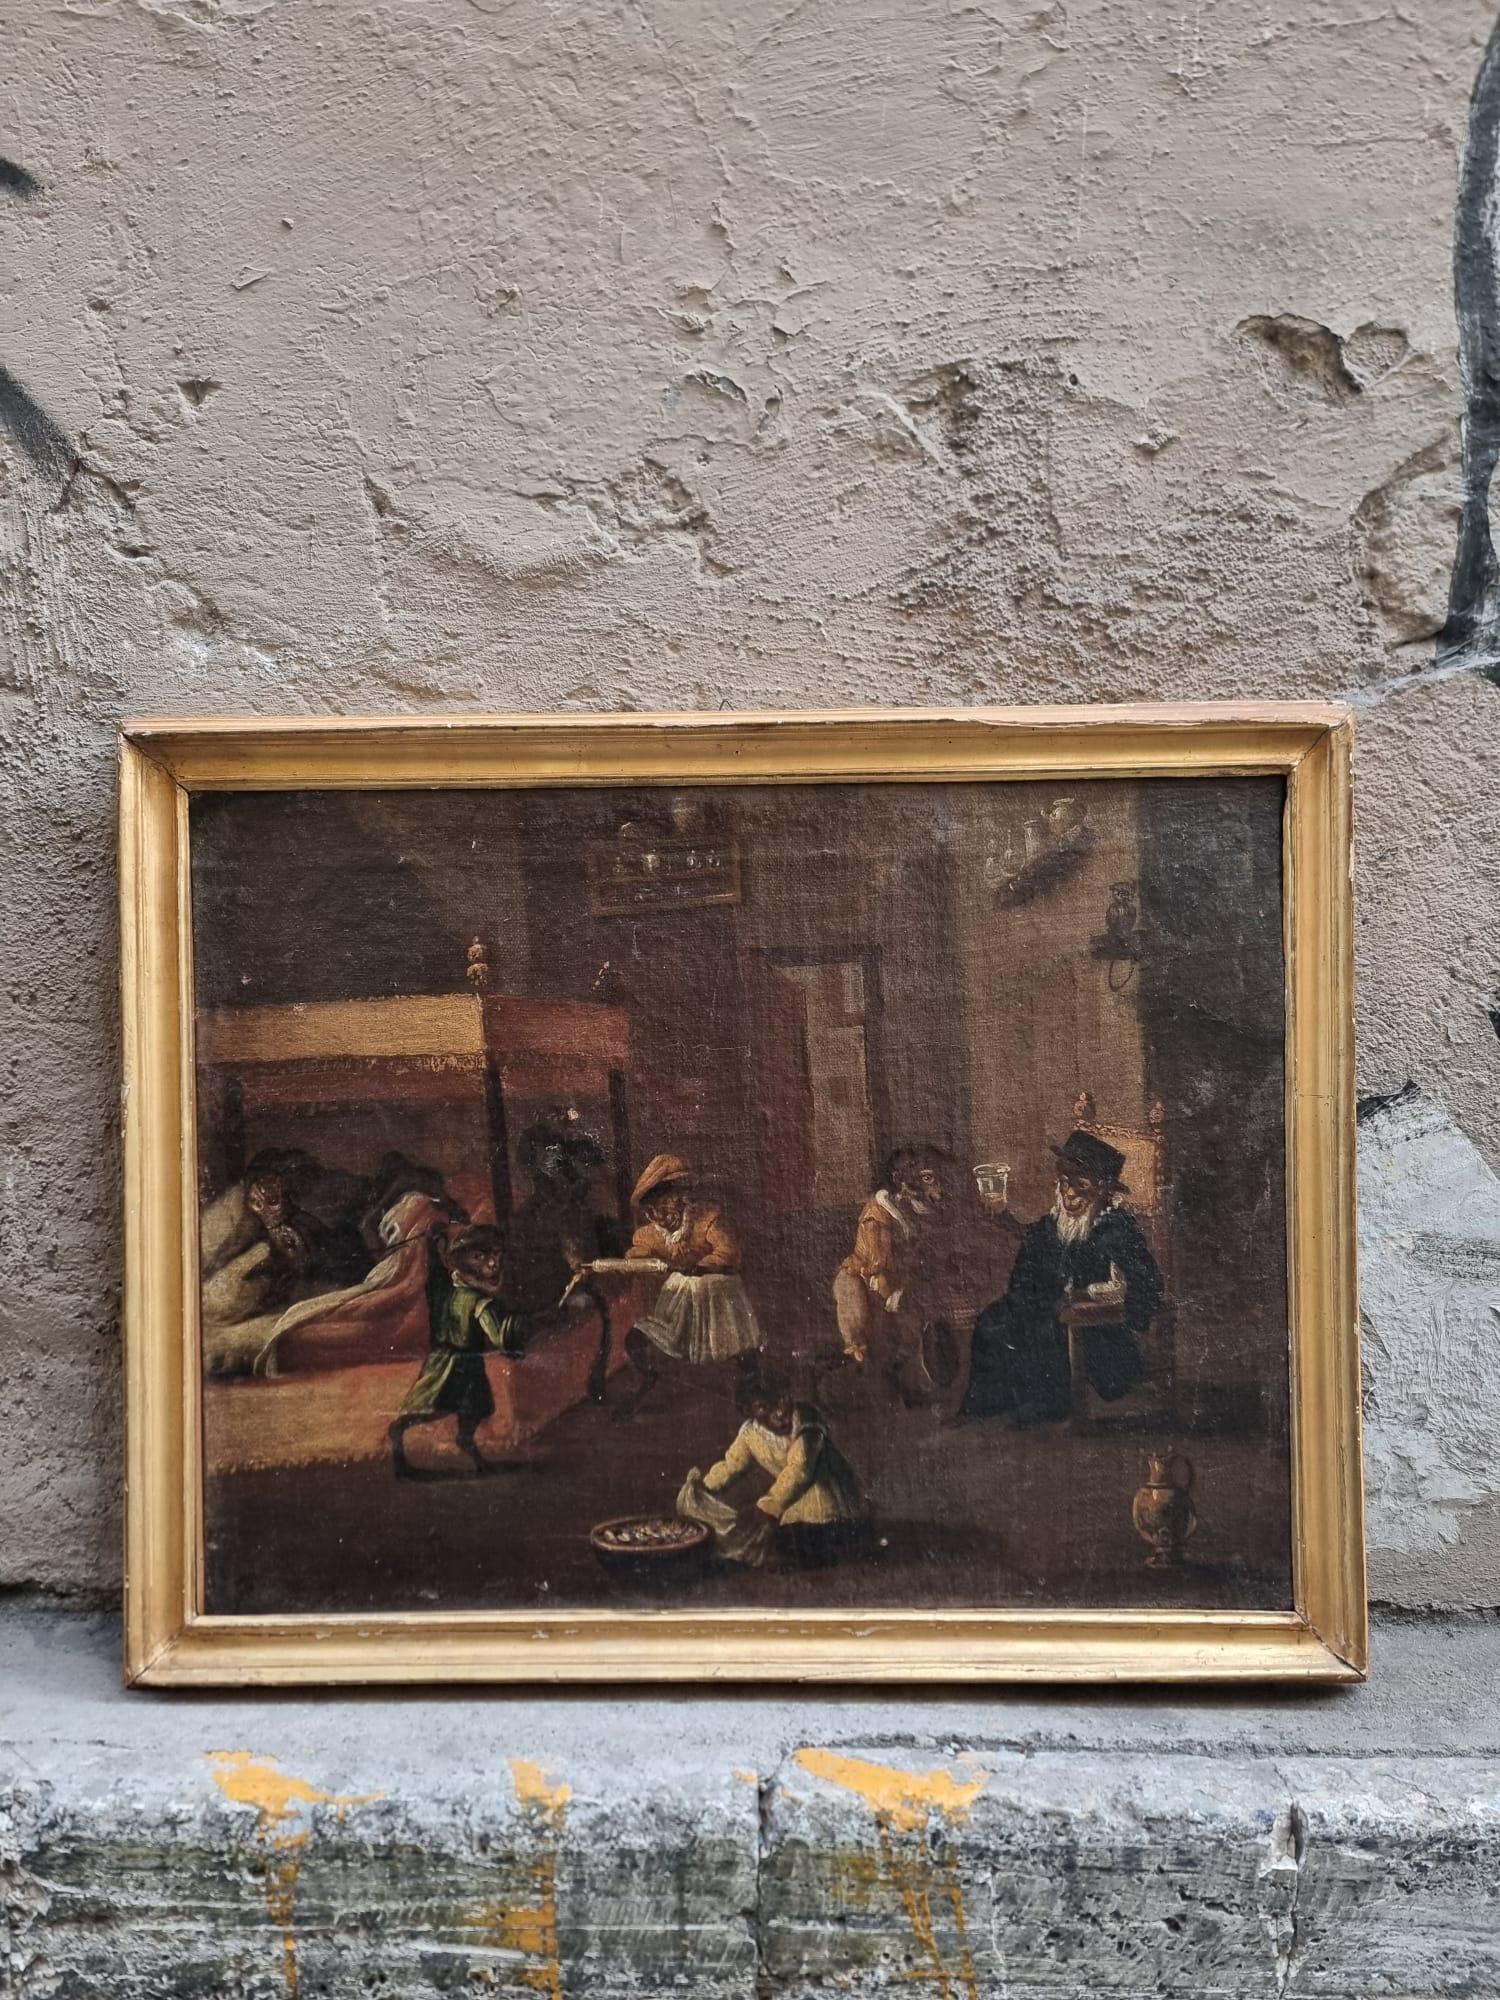 Interior scenes with little monkeys.

The inventor of these unusual works was precisely a Fleming named David Teniers the Younger. At one point in his career he had the idea of placing groups of monkeys in environments, especially indoors, engaged